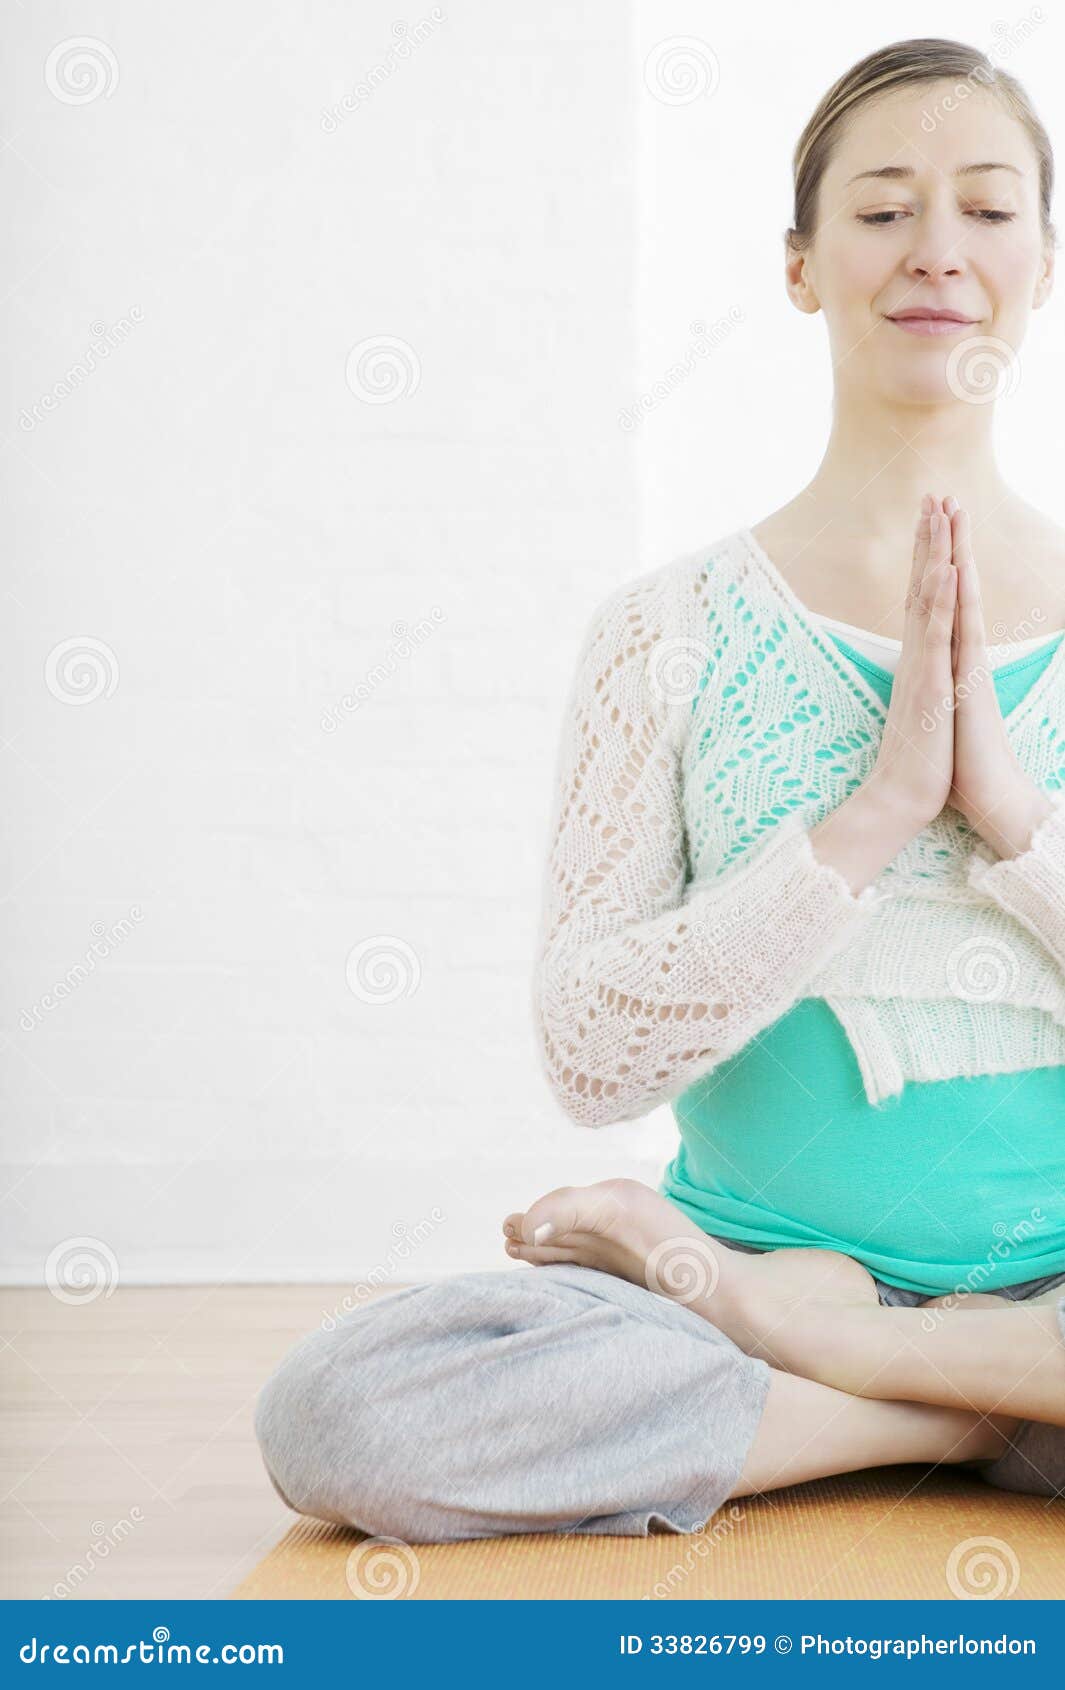 Woman Sitting Cross Legged in a Yoga Pose Stock Image - Image of exercise,  people: 33826799